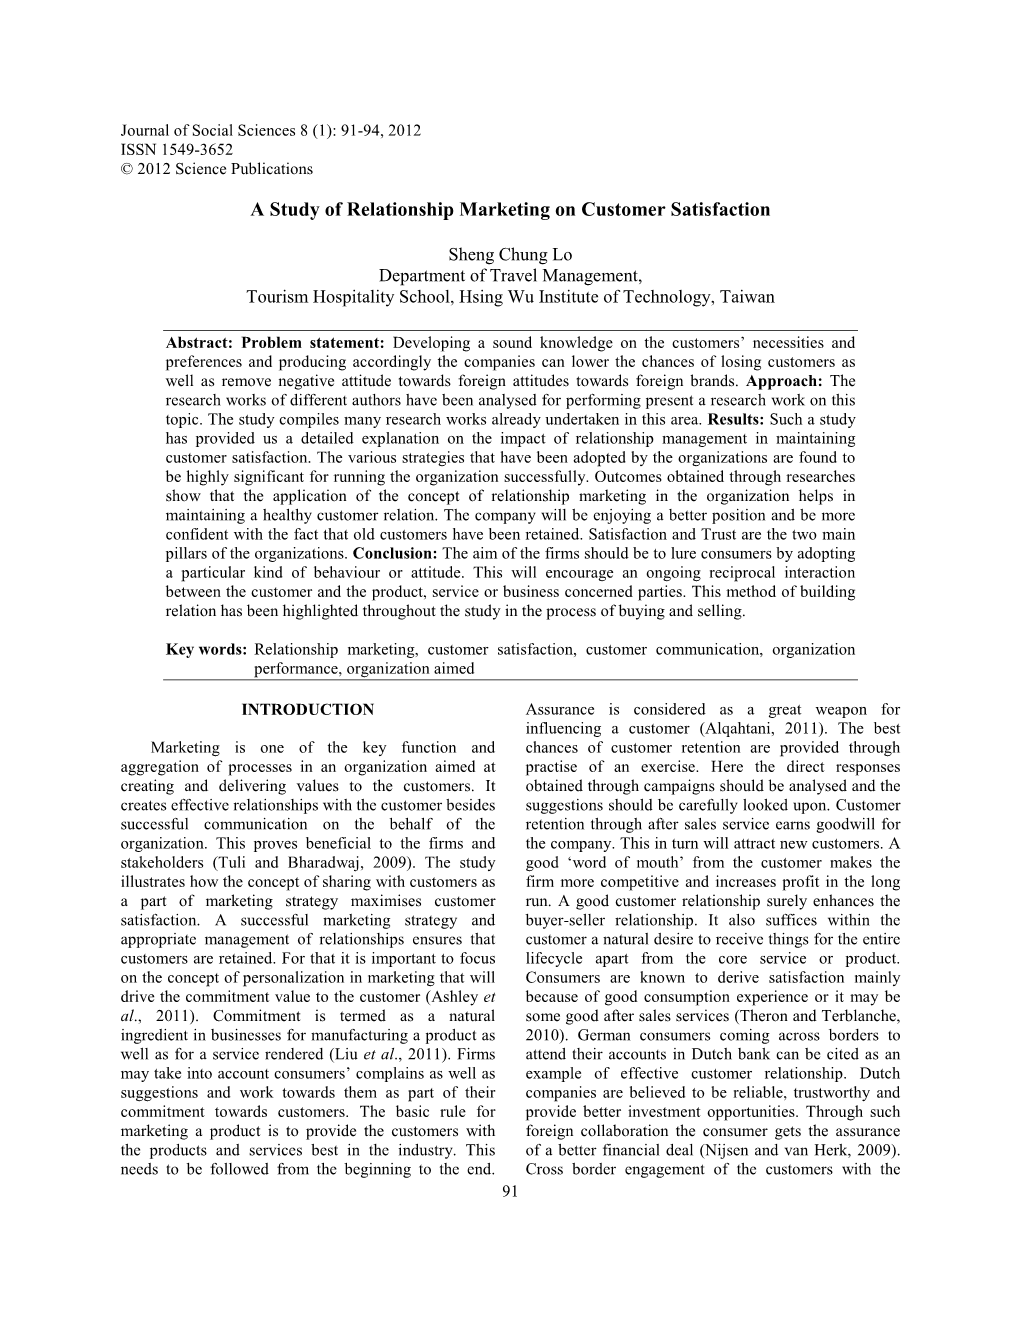 A Study of Relationship Marketing on Customer Satisfaction